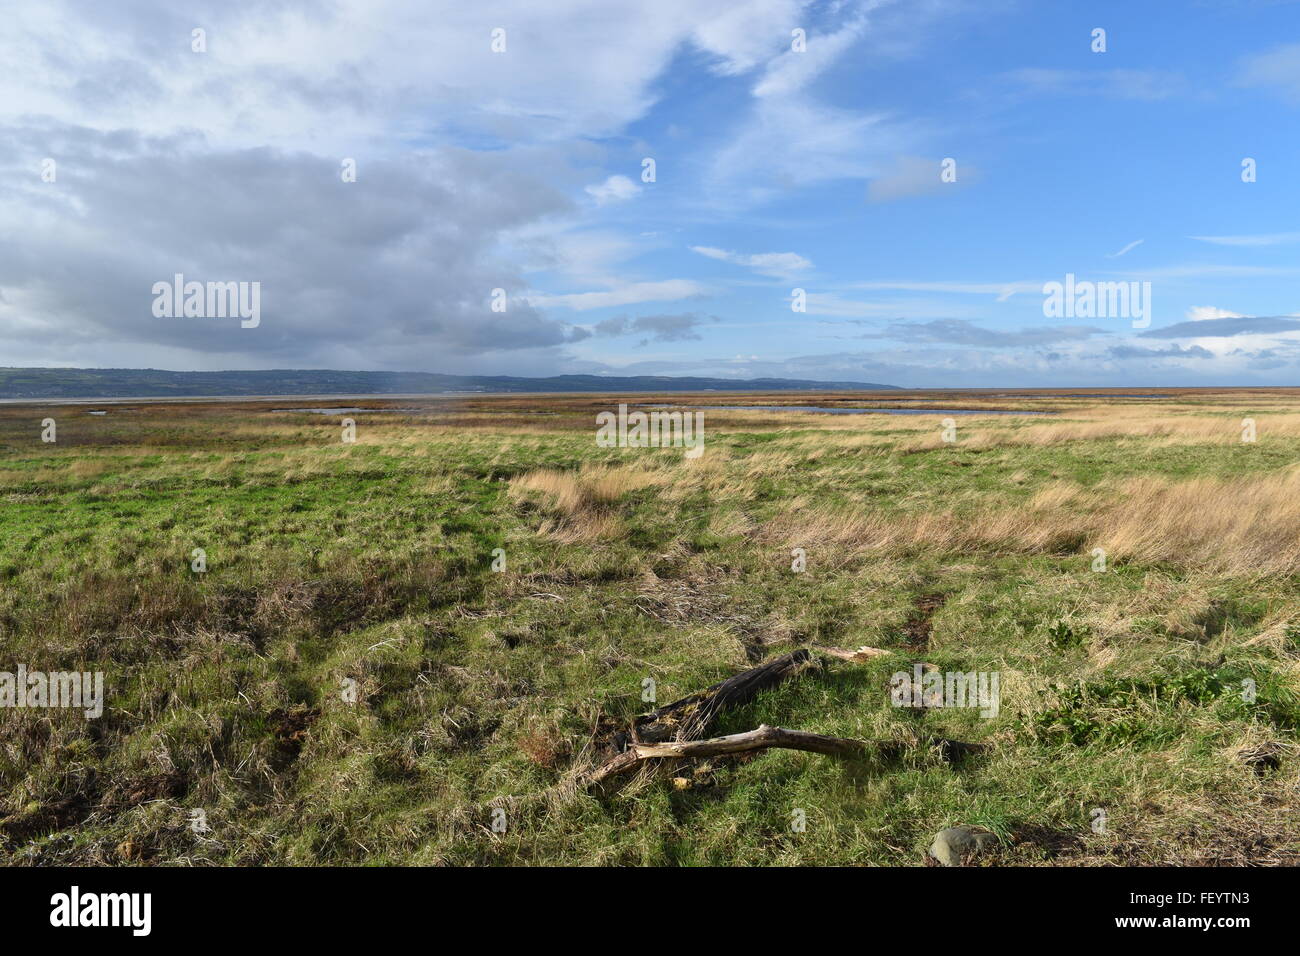 View from Parkgate on the Wirral Peninsular looking across the Dee Estuary towards North Wales. Stock Photo